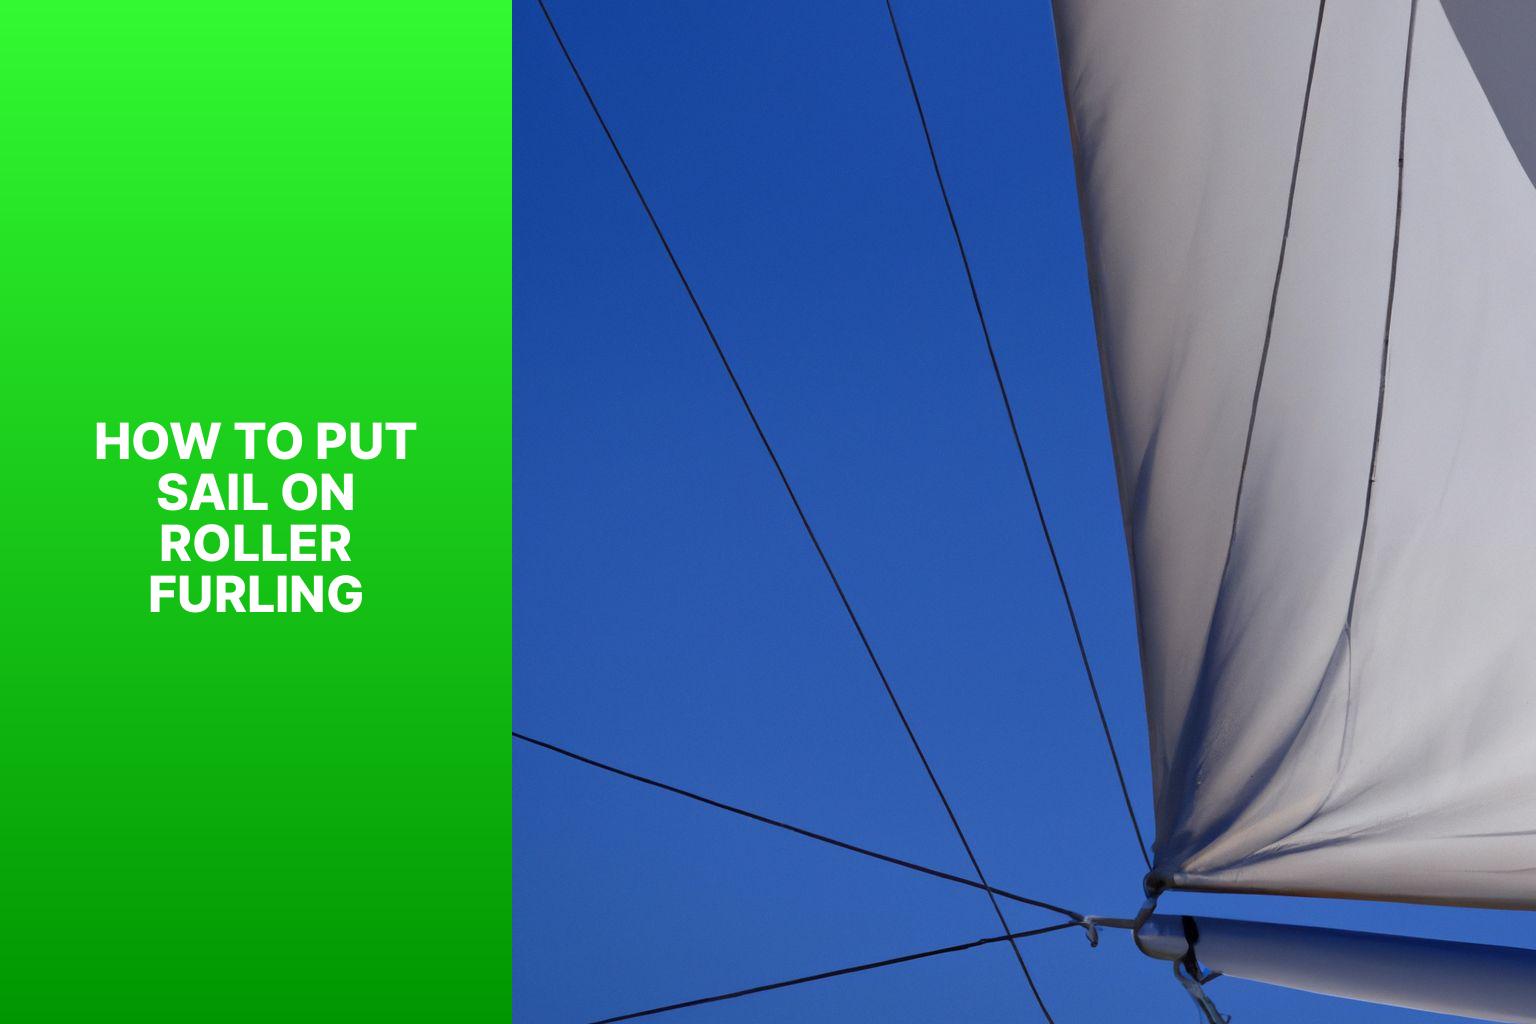 Learn the Step-by-Step Process of Putting Sail on Roller Furling